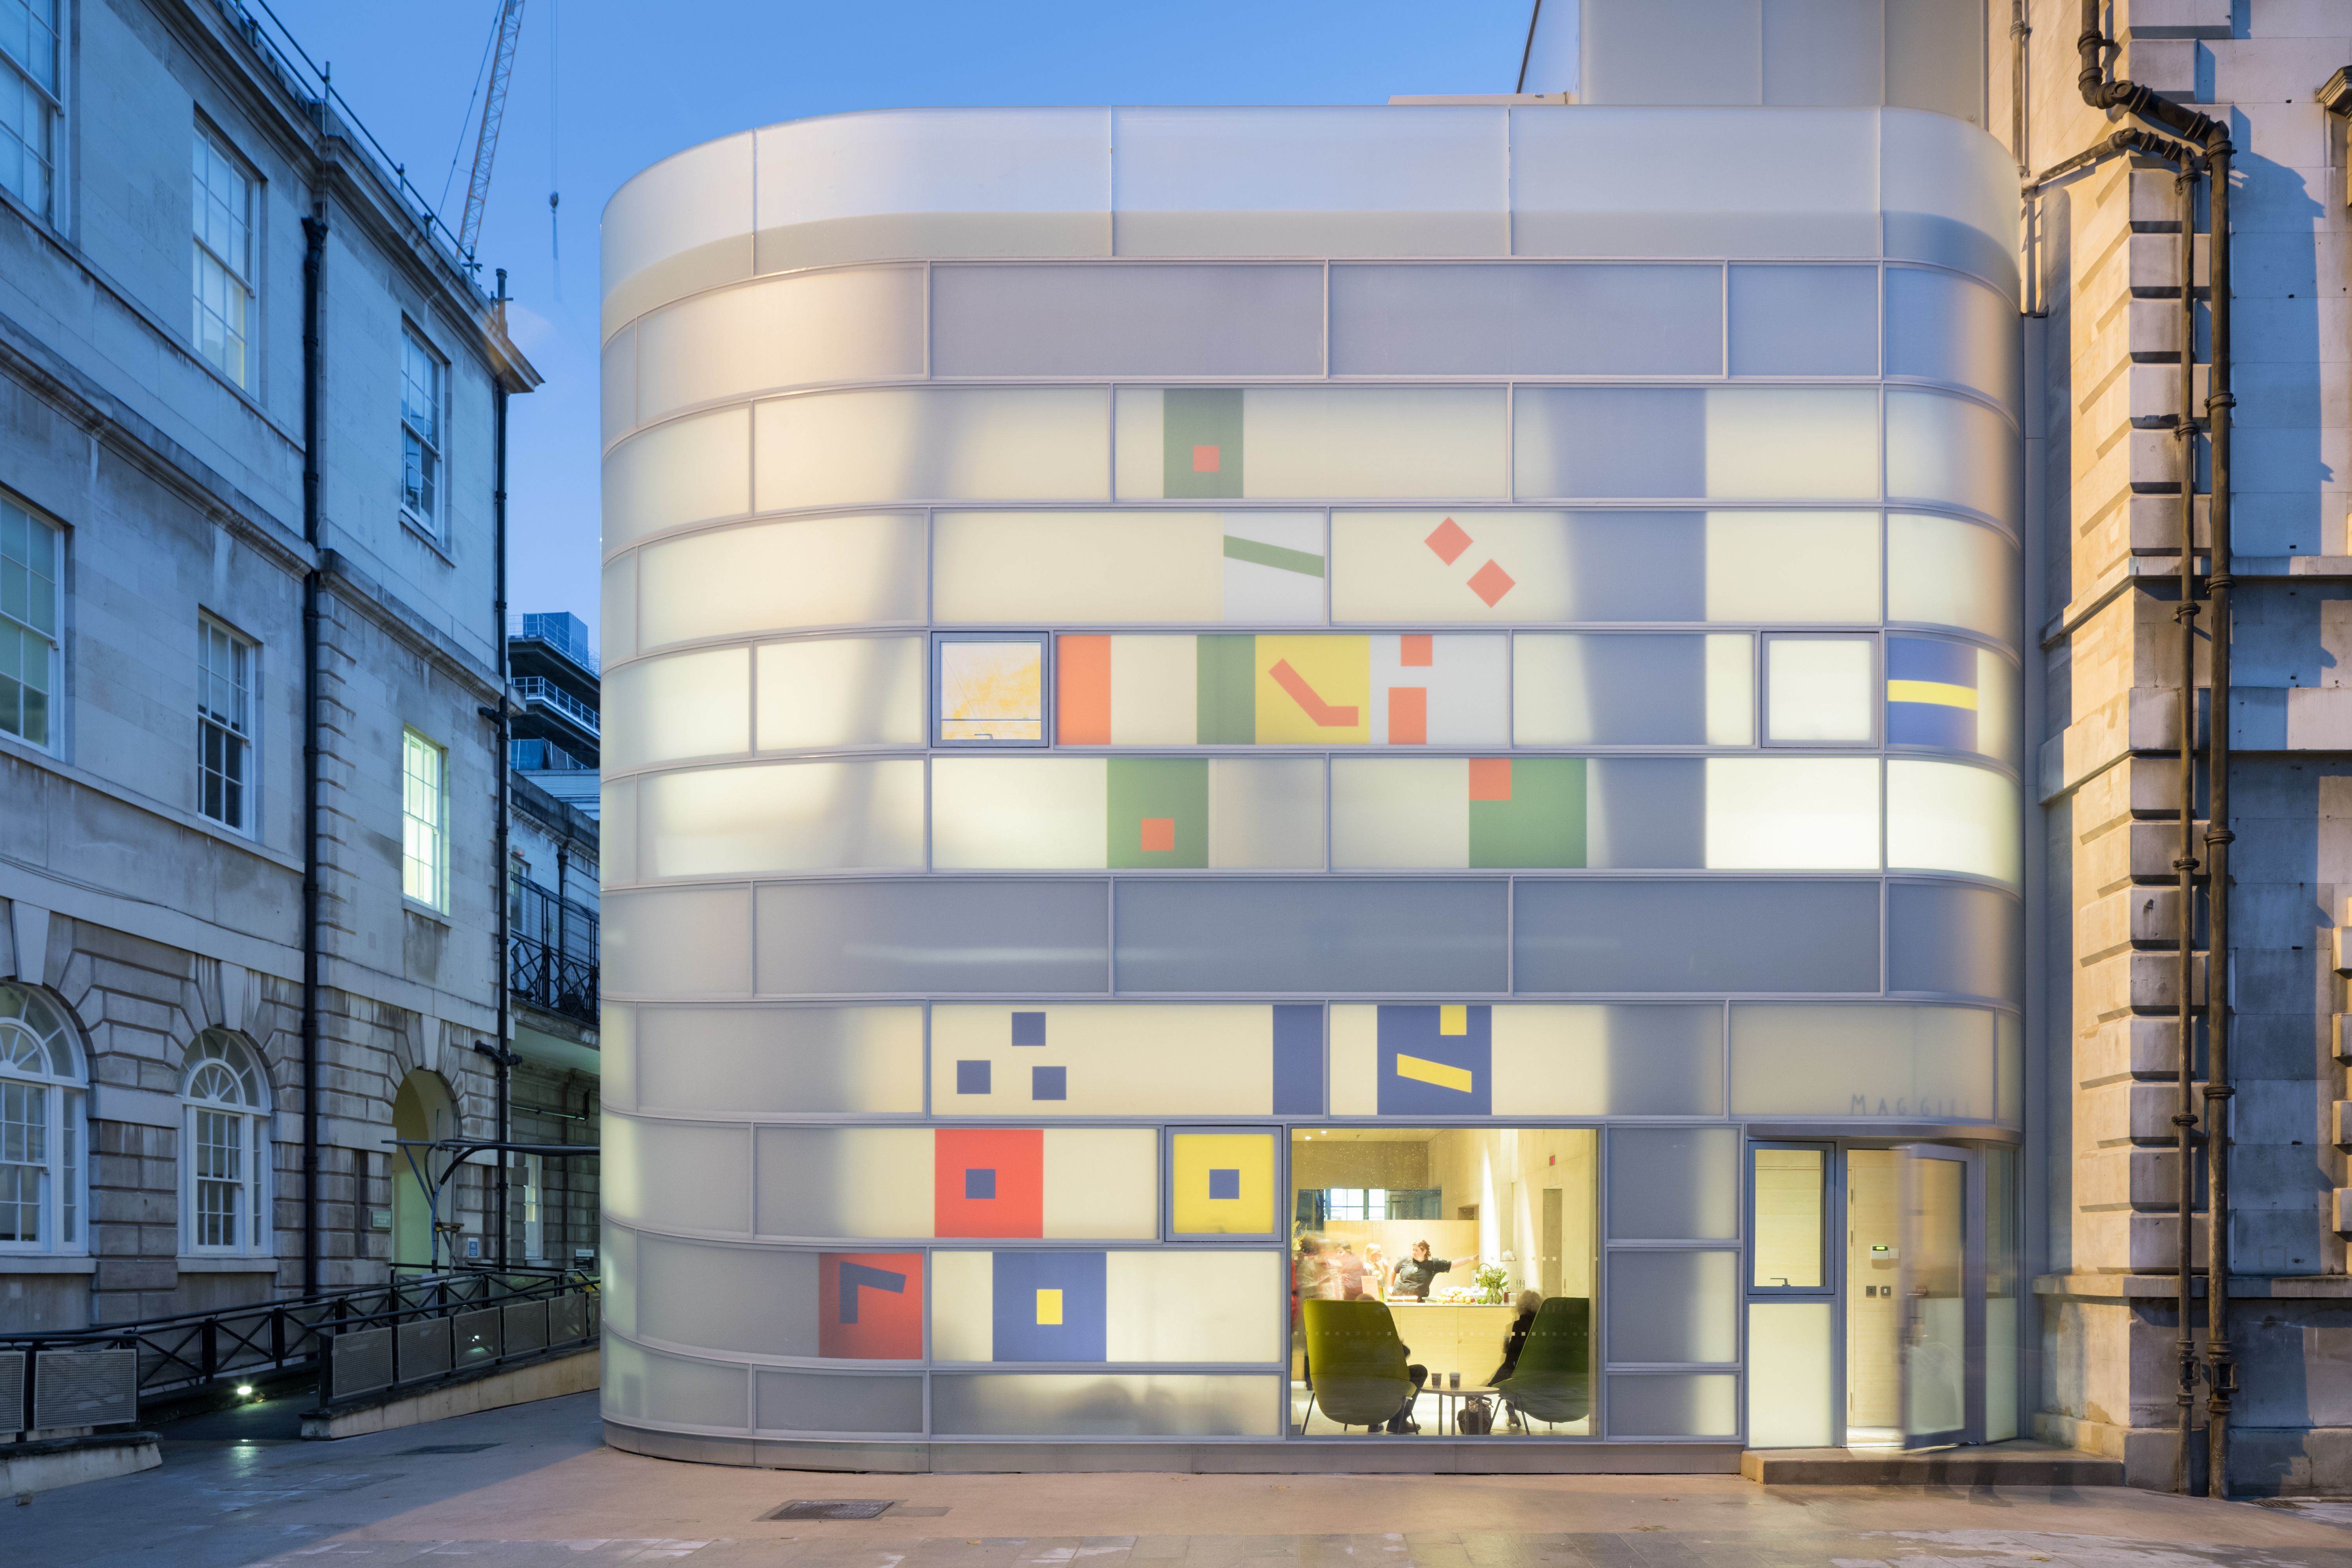 2019 Maggie's Centre St Barts Steven Holl Architects